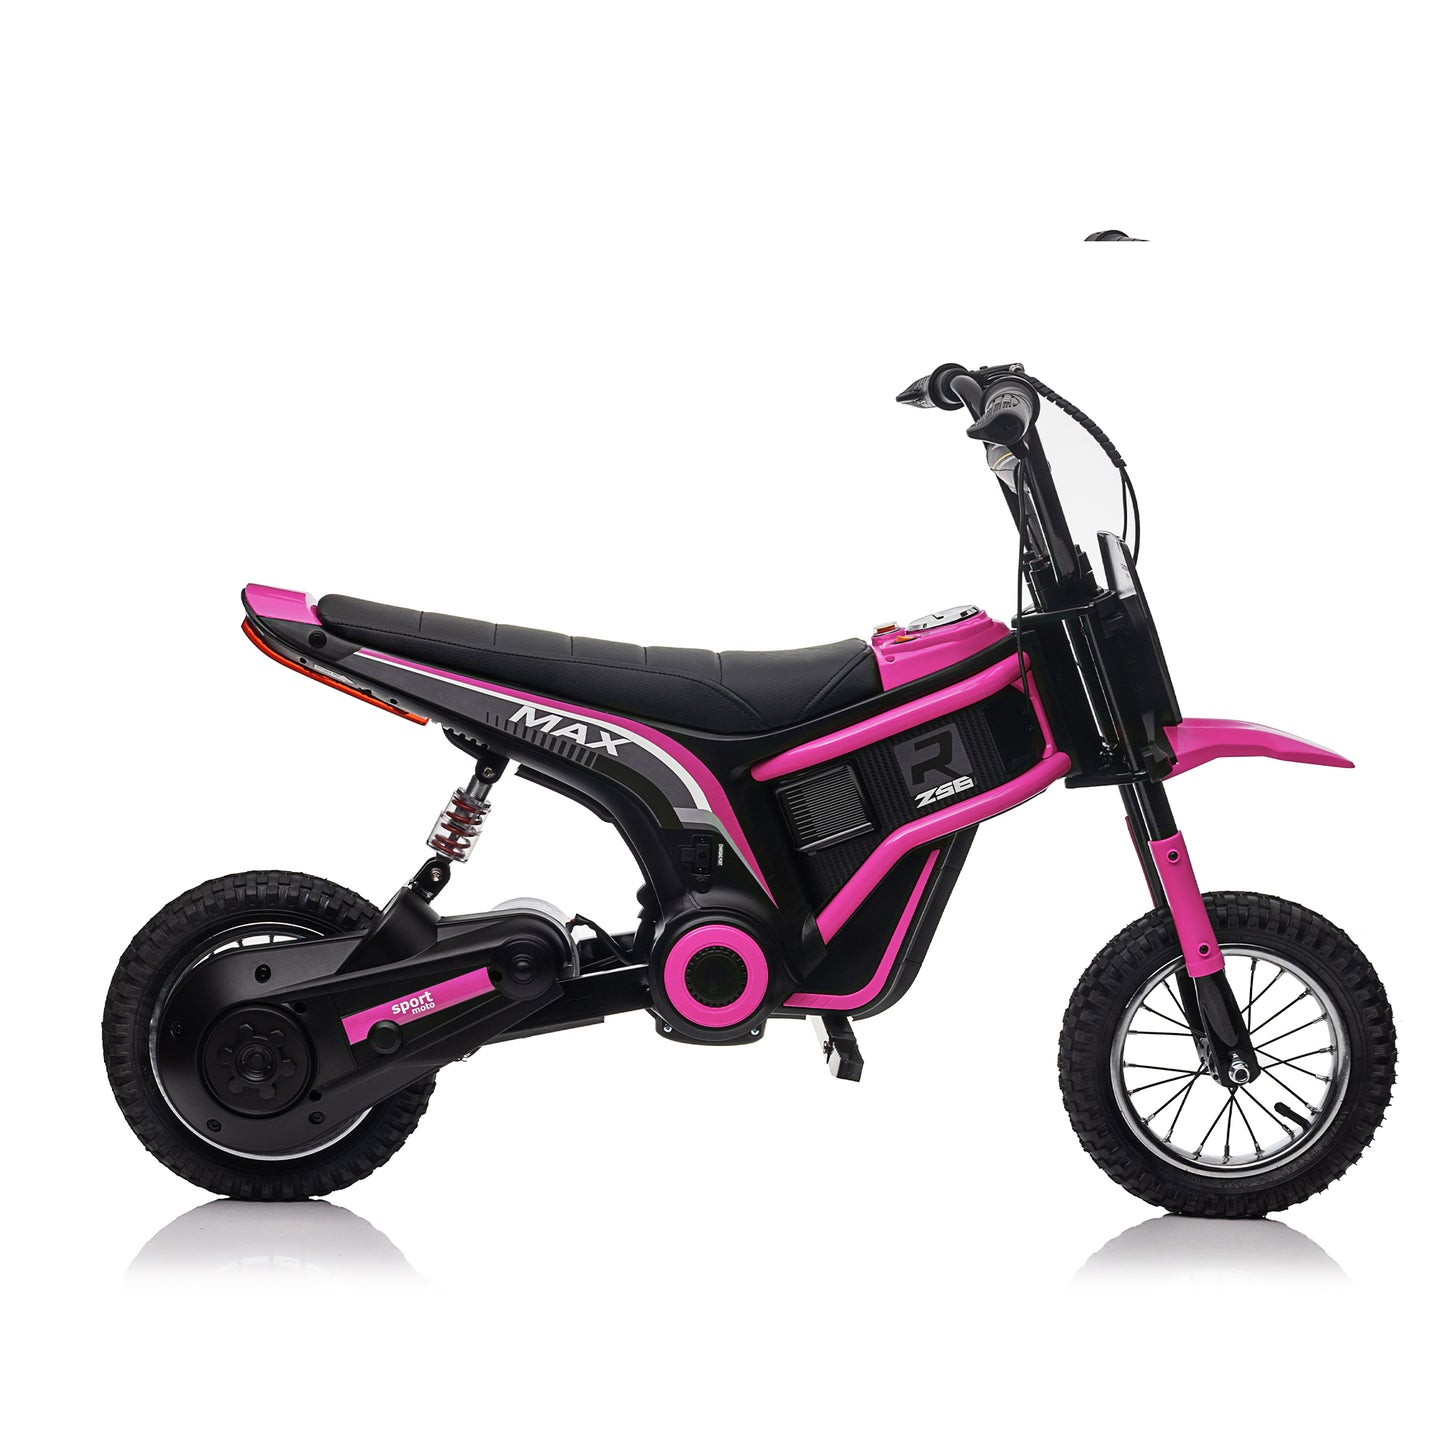 Kids Ride On 24V Electric Toy Motocross Motorcycle Dirt Bike-XXL large,age8-12 Speeds up to 14.29MPH,Dual Suspension, Hand-Operated Dual Brakes, Twist Grip Throttle, Authentic Motocross Bike Geometry